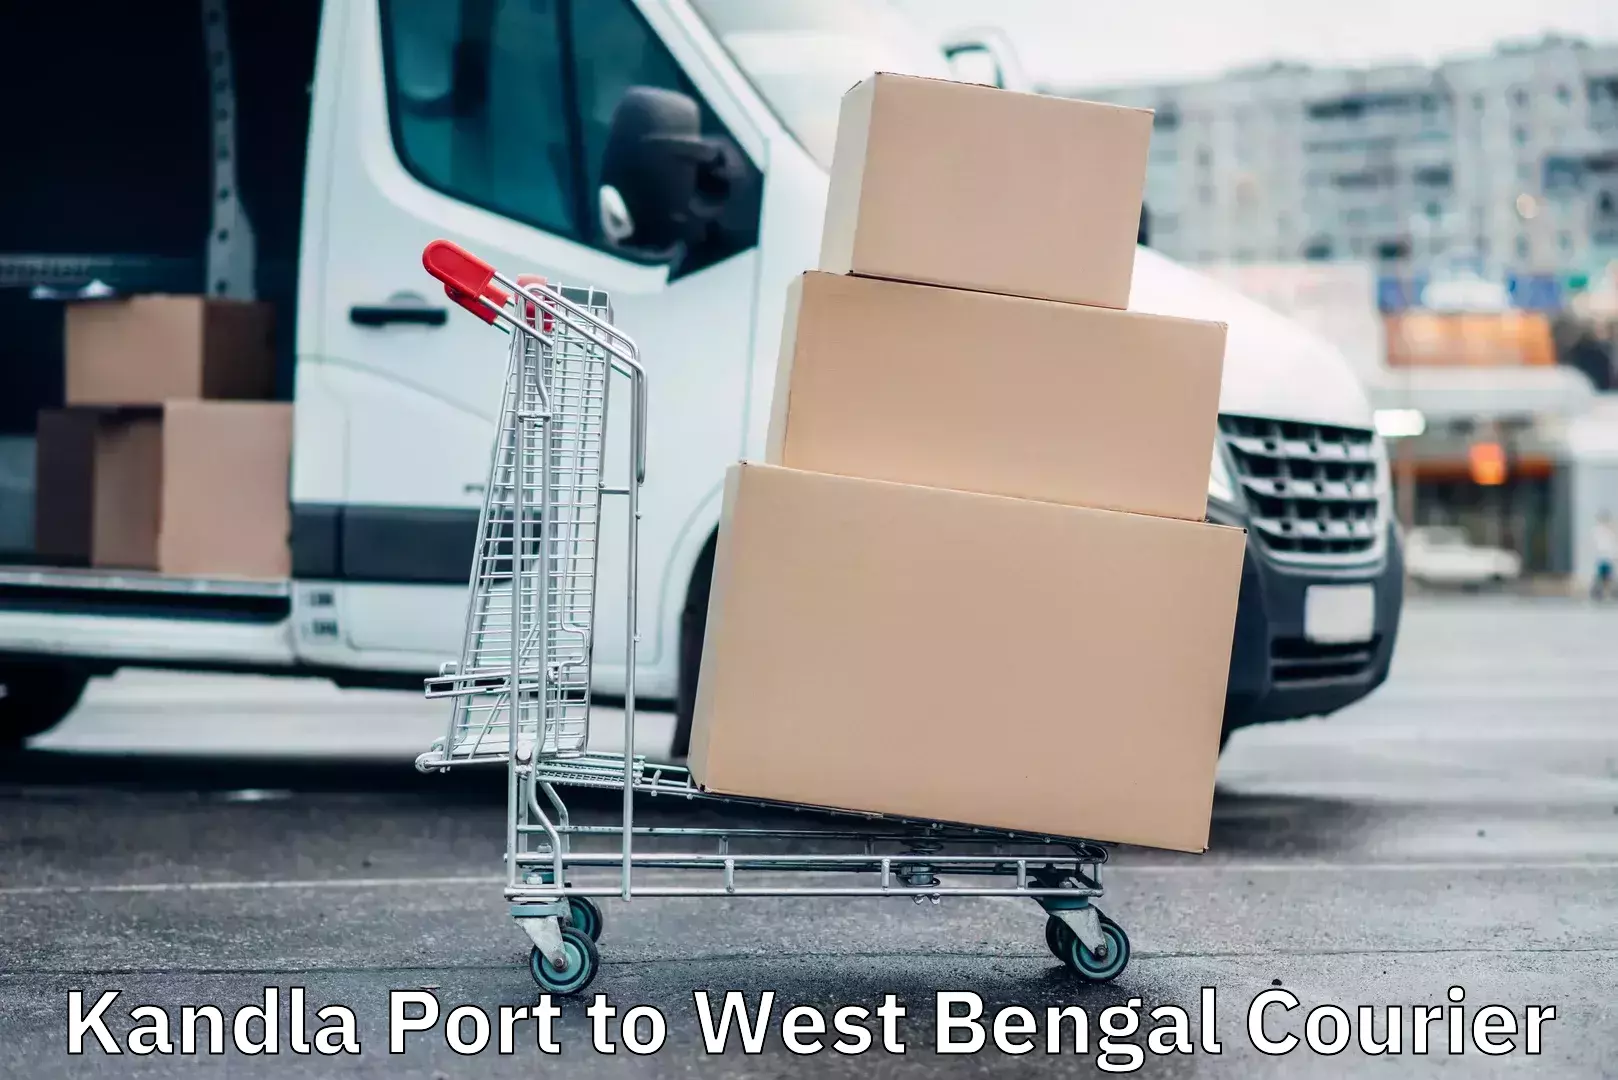 Discount courier rates in Kandla Port to West Bengal